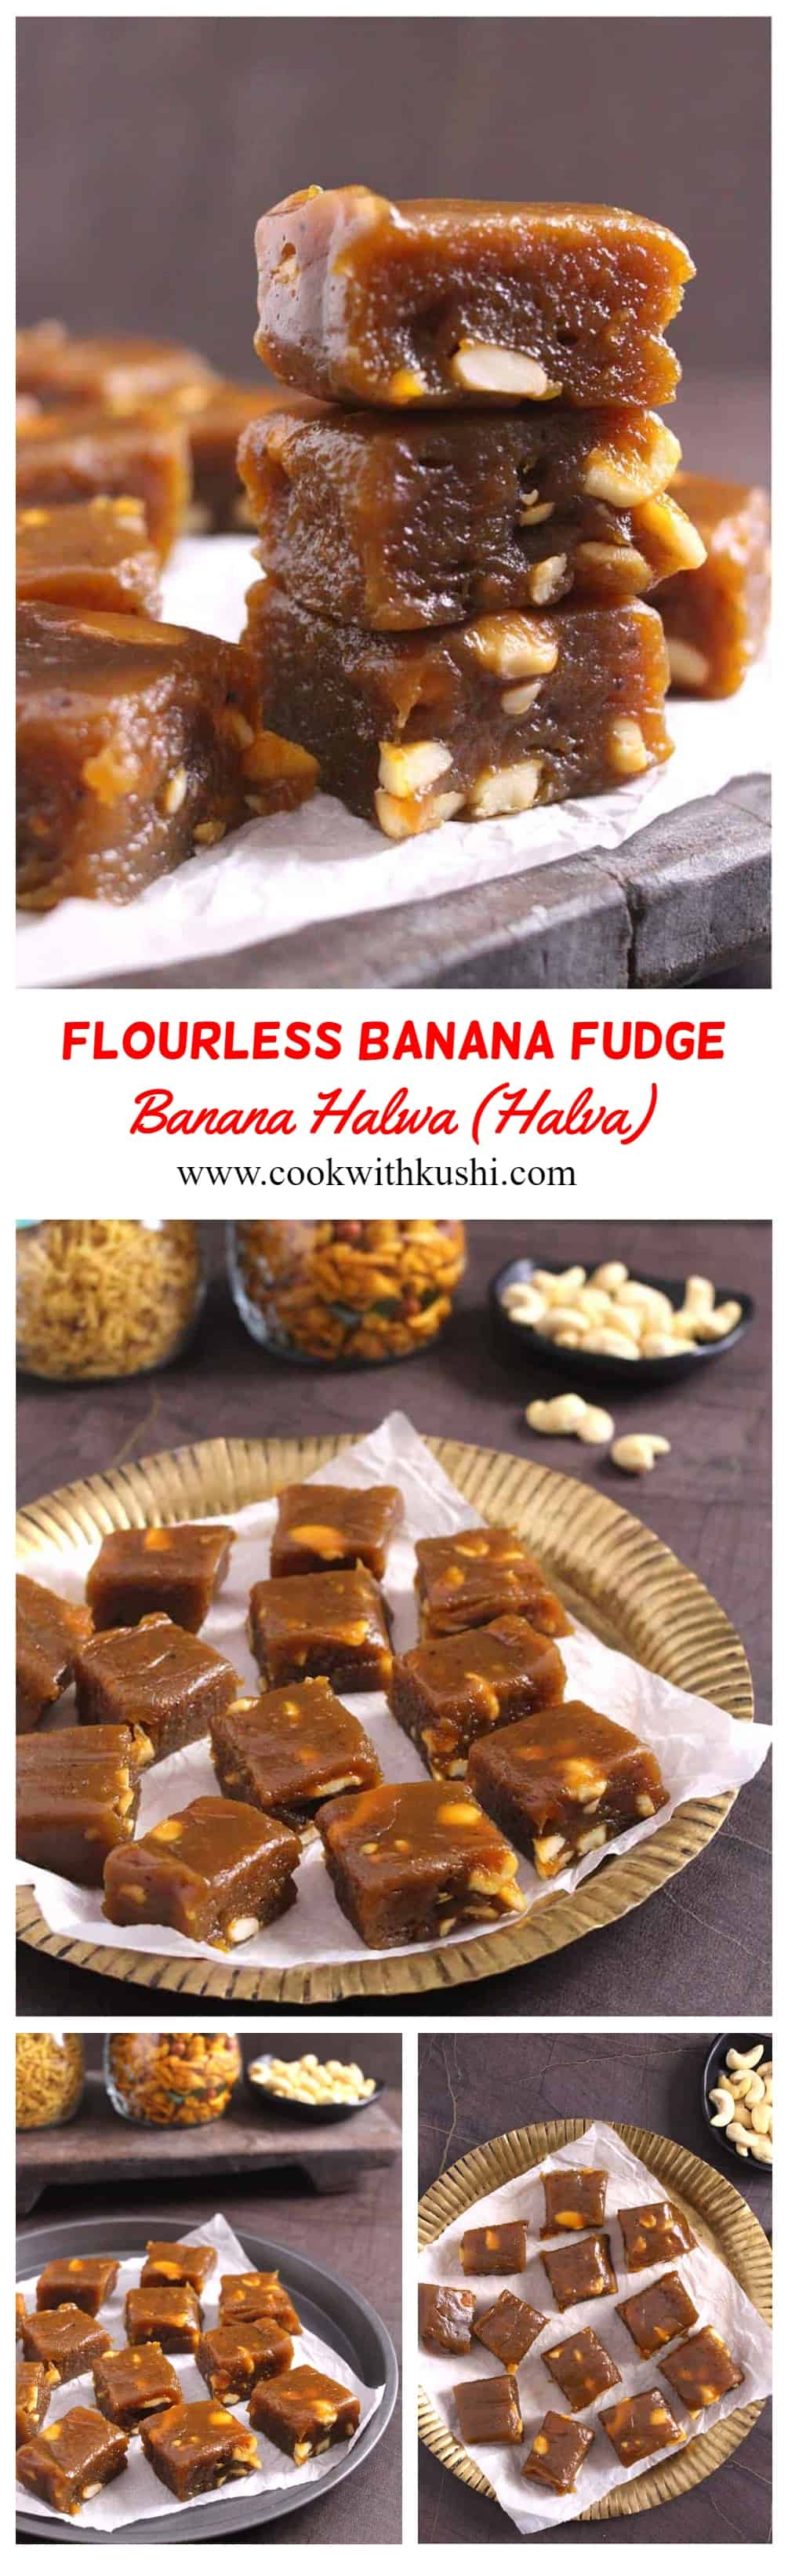 Banana Halwa or Banana Fudge is a traditional and classic, chewy, and flourless sweet recipe prepared using four ingredients from your kitchen. One of the best recipe to try if you have overripe bananas at home. #banana #overripe #plantains #halwa #glutenfree #flourless #fudge